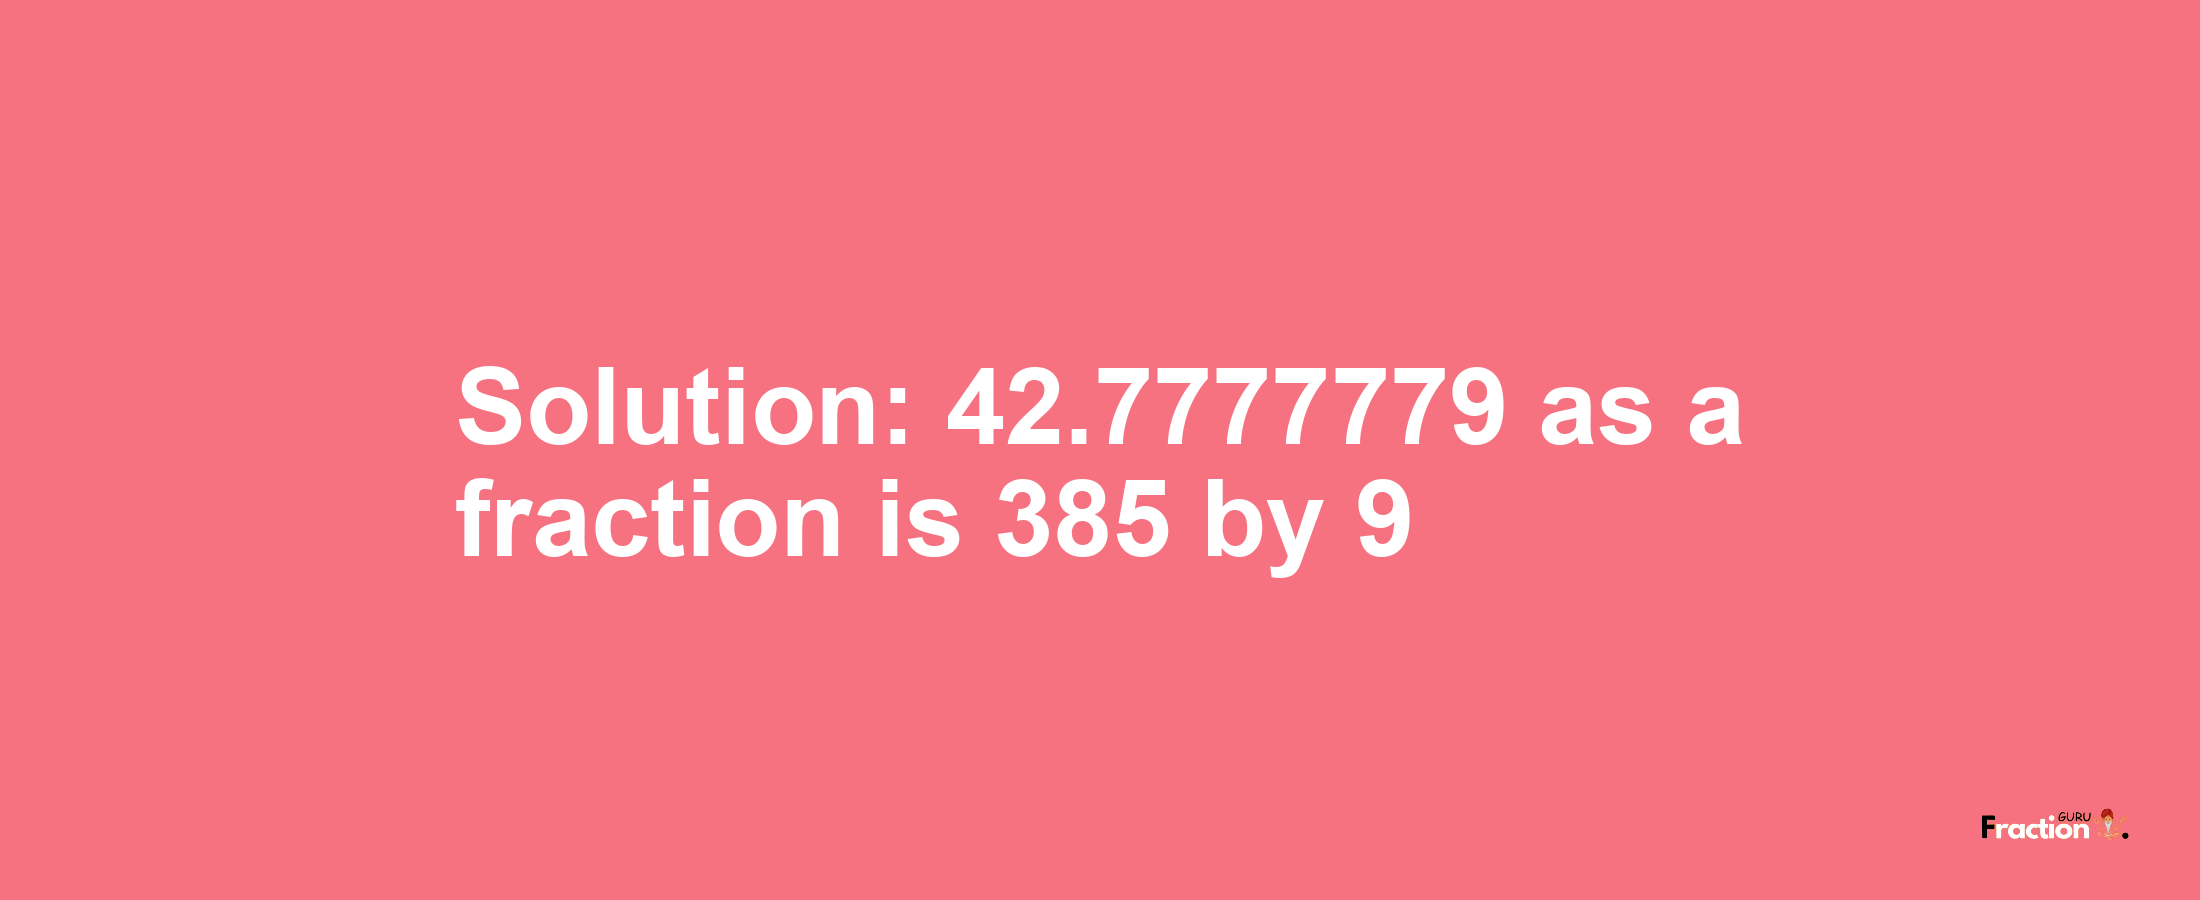 Solution:42.7777779 as a fraction is 385/9